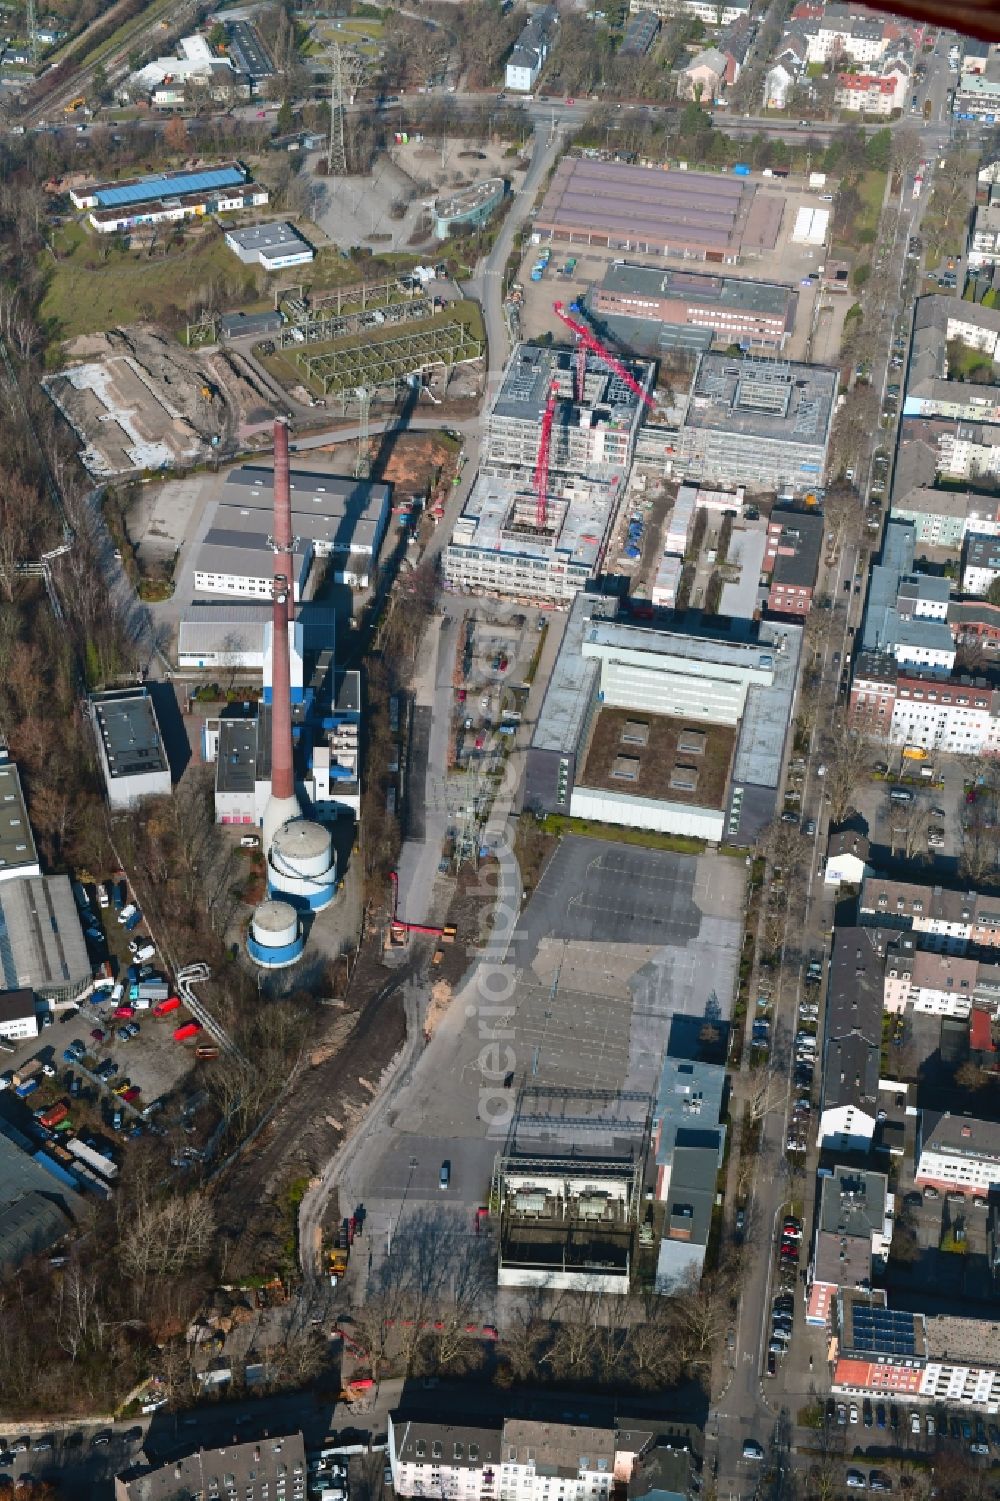 Essen from above - Construction site to build a new office and commercial building RWE Campus on Altenessener Strasse in the district Nordviertel in Essen in the state North Rhine-Westphalia, Germany